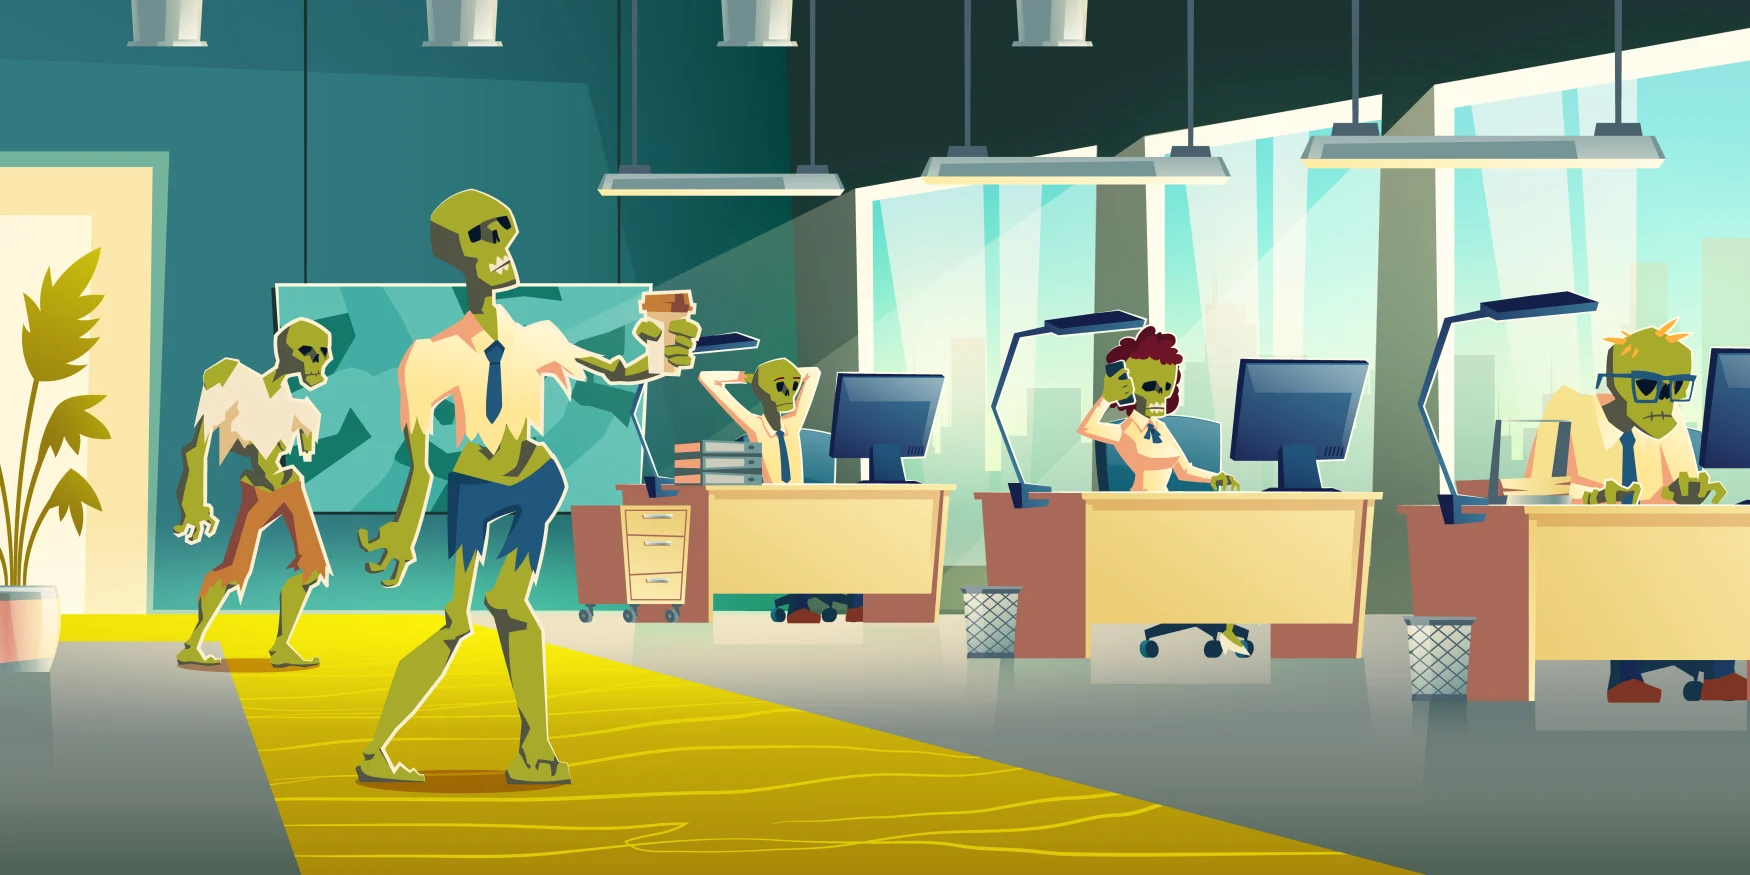 Exhausting office work concept. Female, male zombie characters in ragged clothing, working on computer, using cellphone at desks, walking with coffee cup in office interior cartoon vector illustration